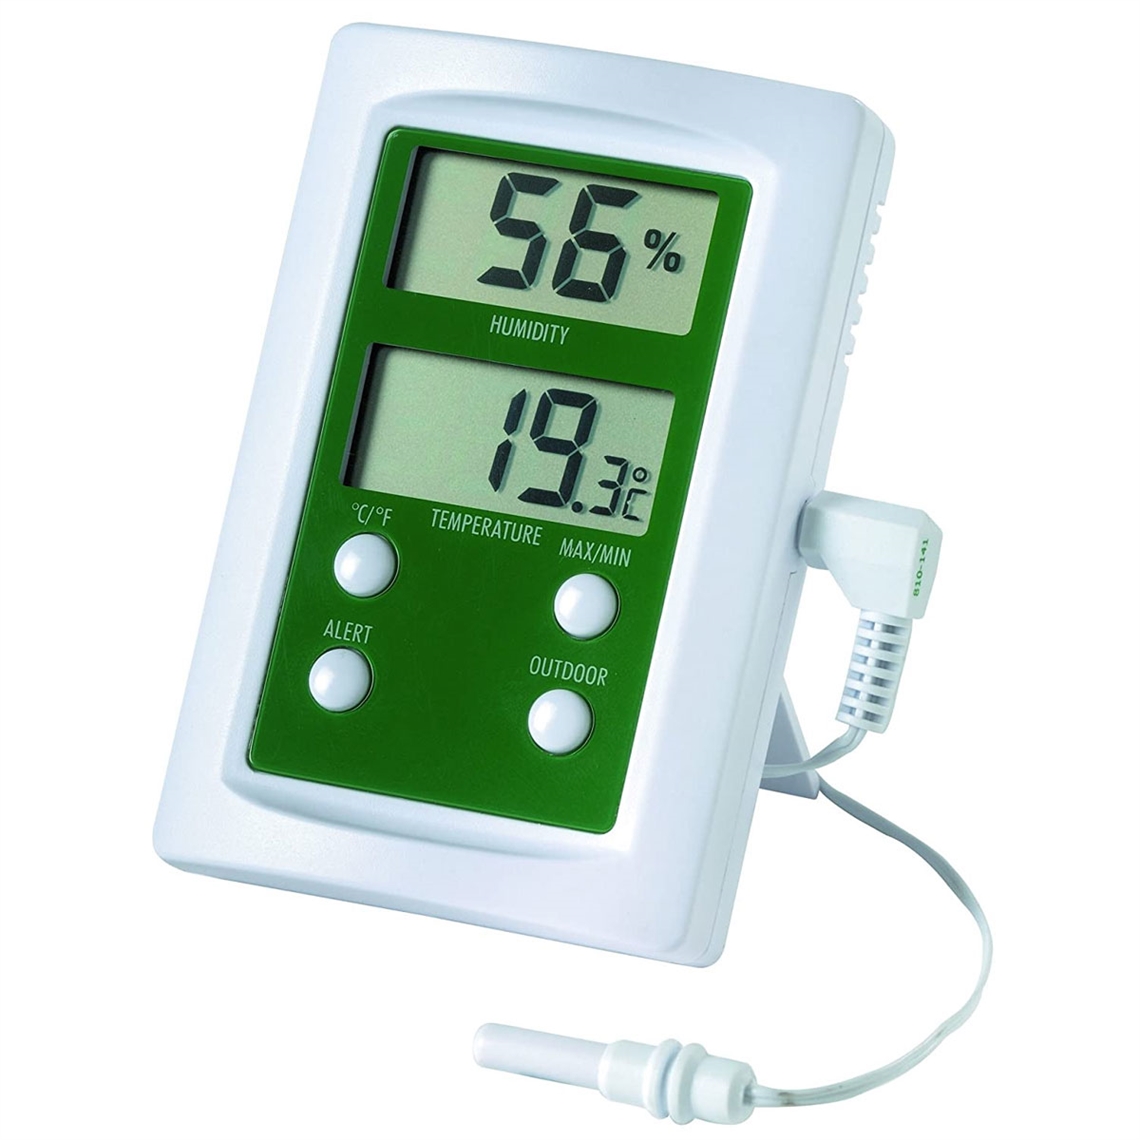 View more meaco from our Thermo Hygrometers range